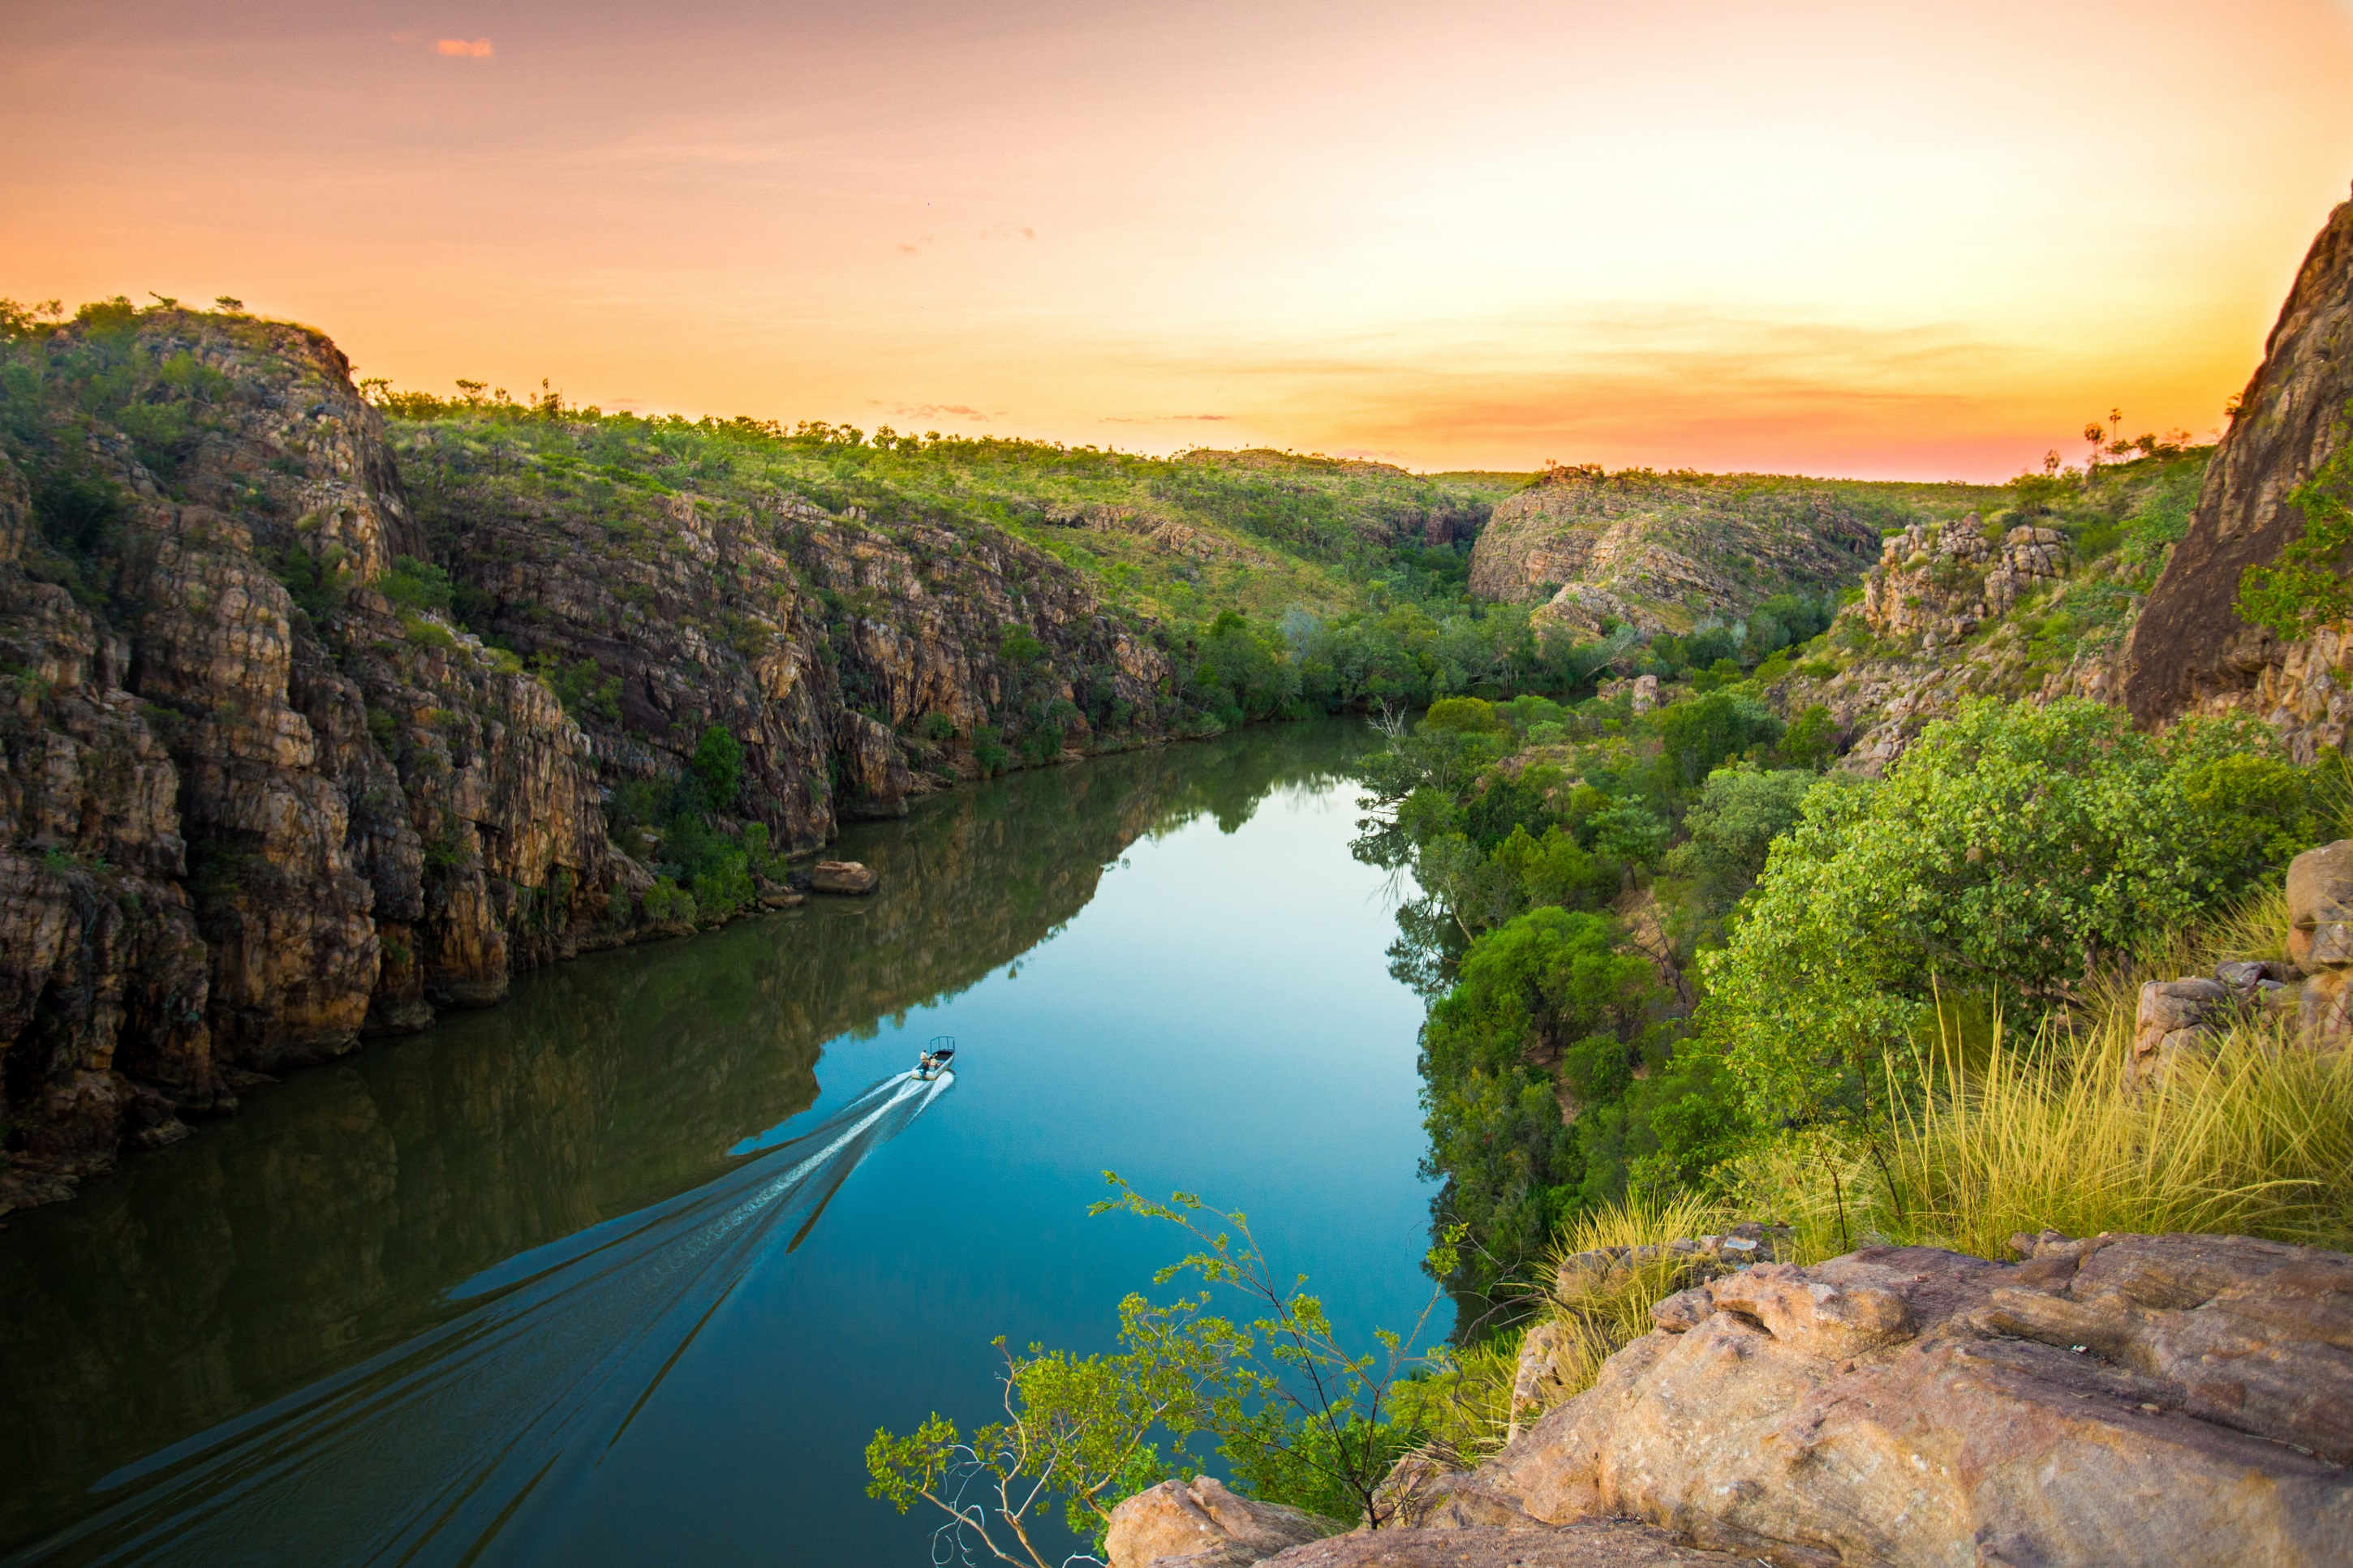 1-Day Tour to Katherine Gorge Cruise + Edith Falls from Darwin